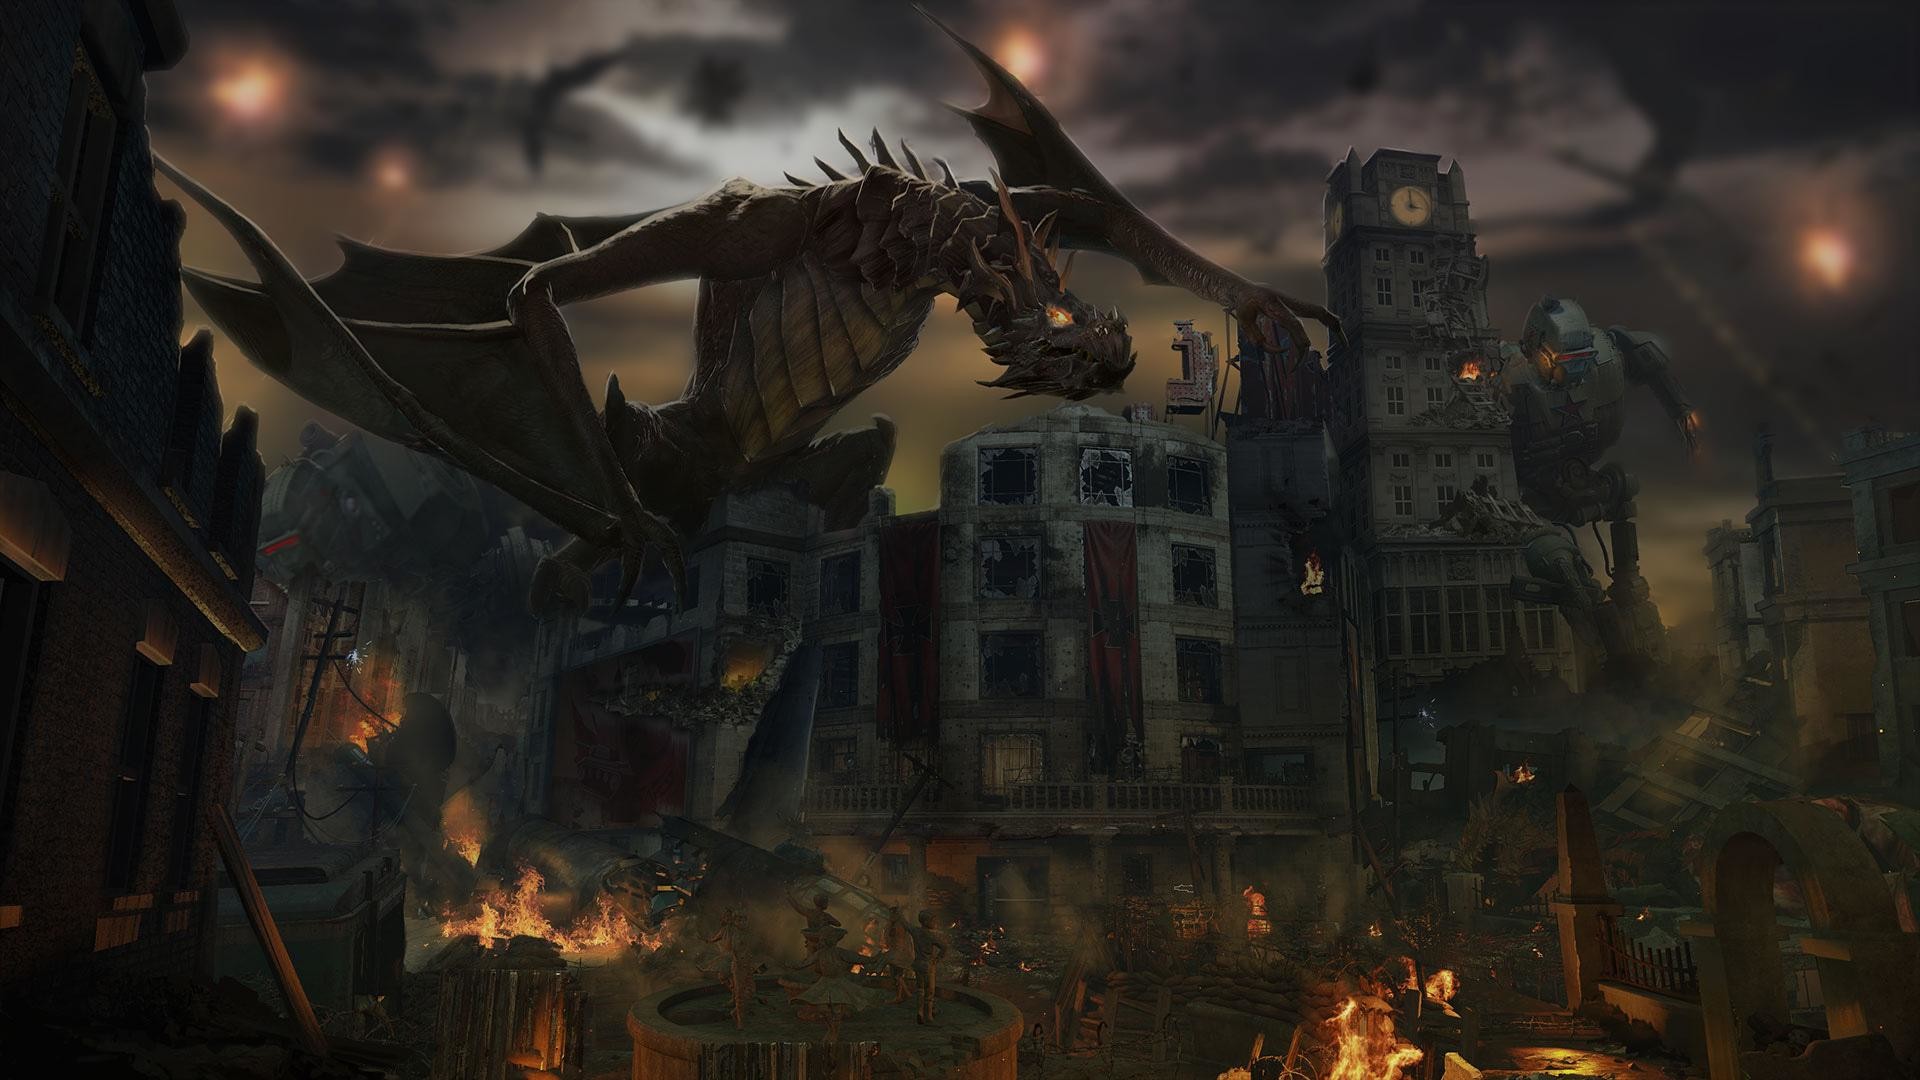 1920x1080 Gorod Krovi High Depth of Field Wallpaper - and Mobile Version  Need #iPhone #